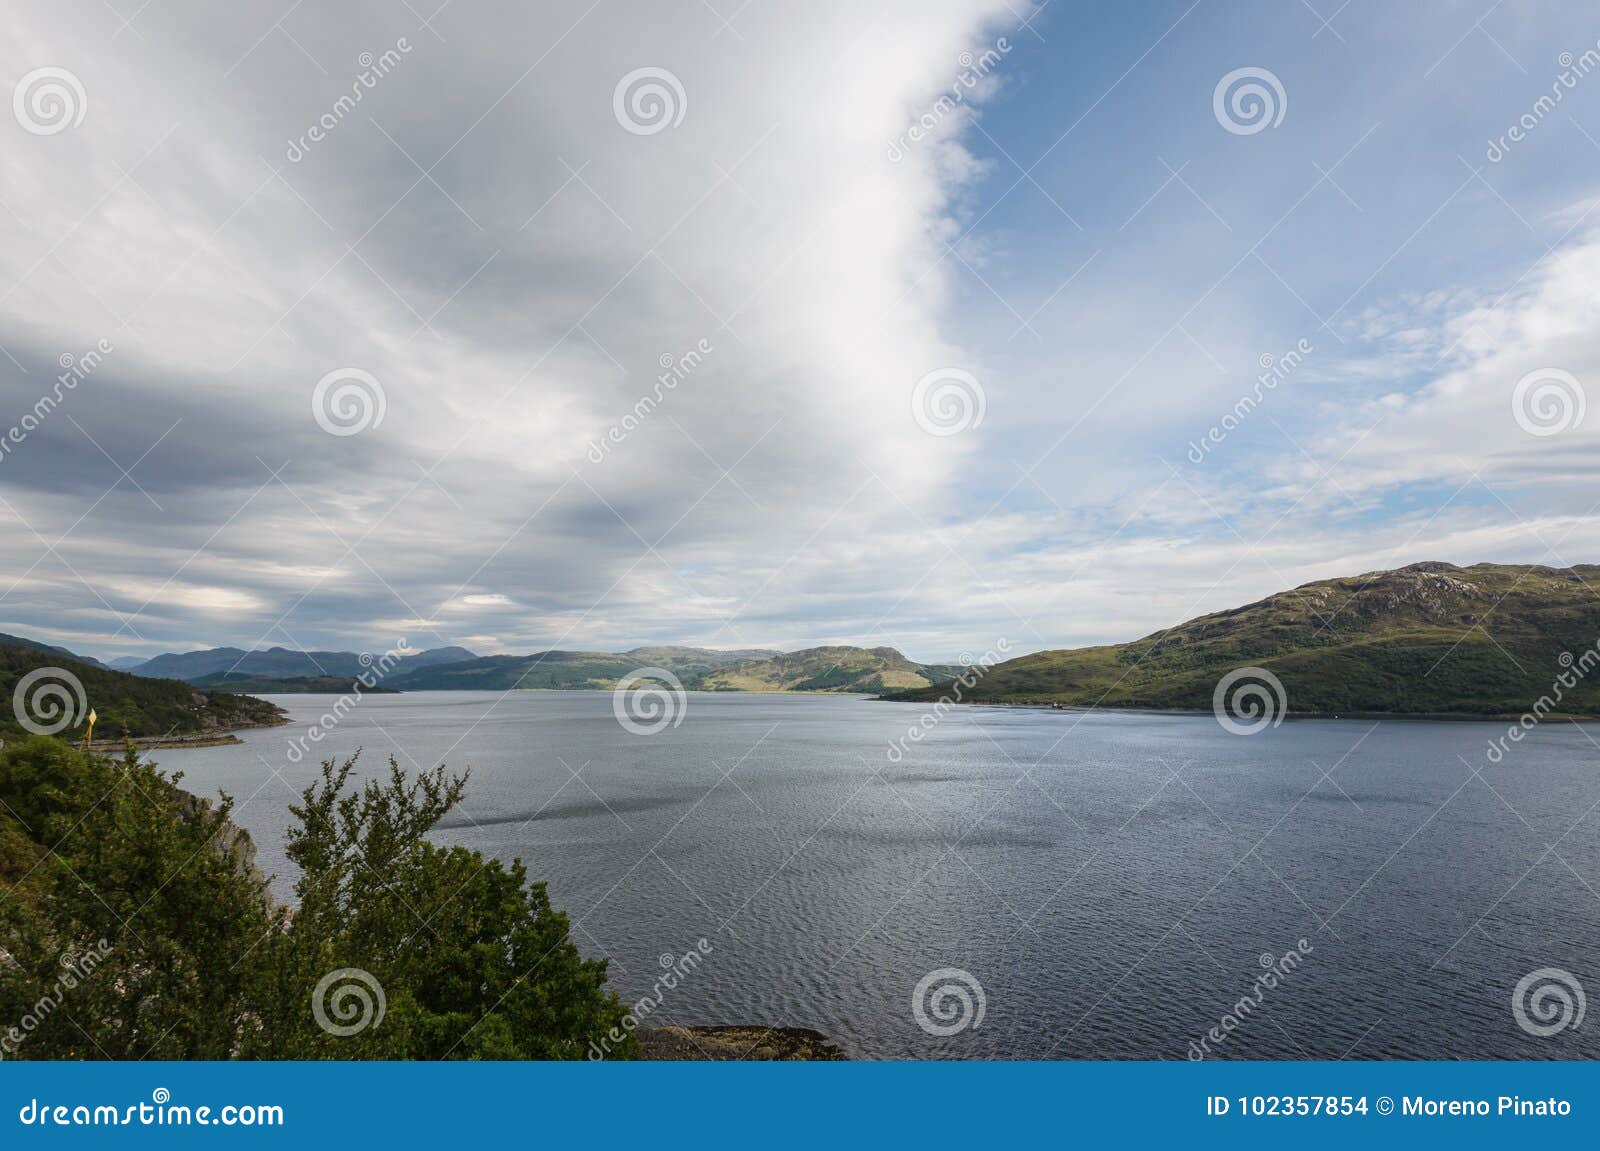 Views loch alsh viewpoint stock photo. Image of highlands - 102357854